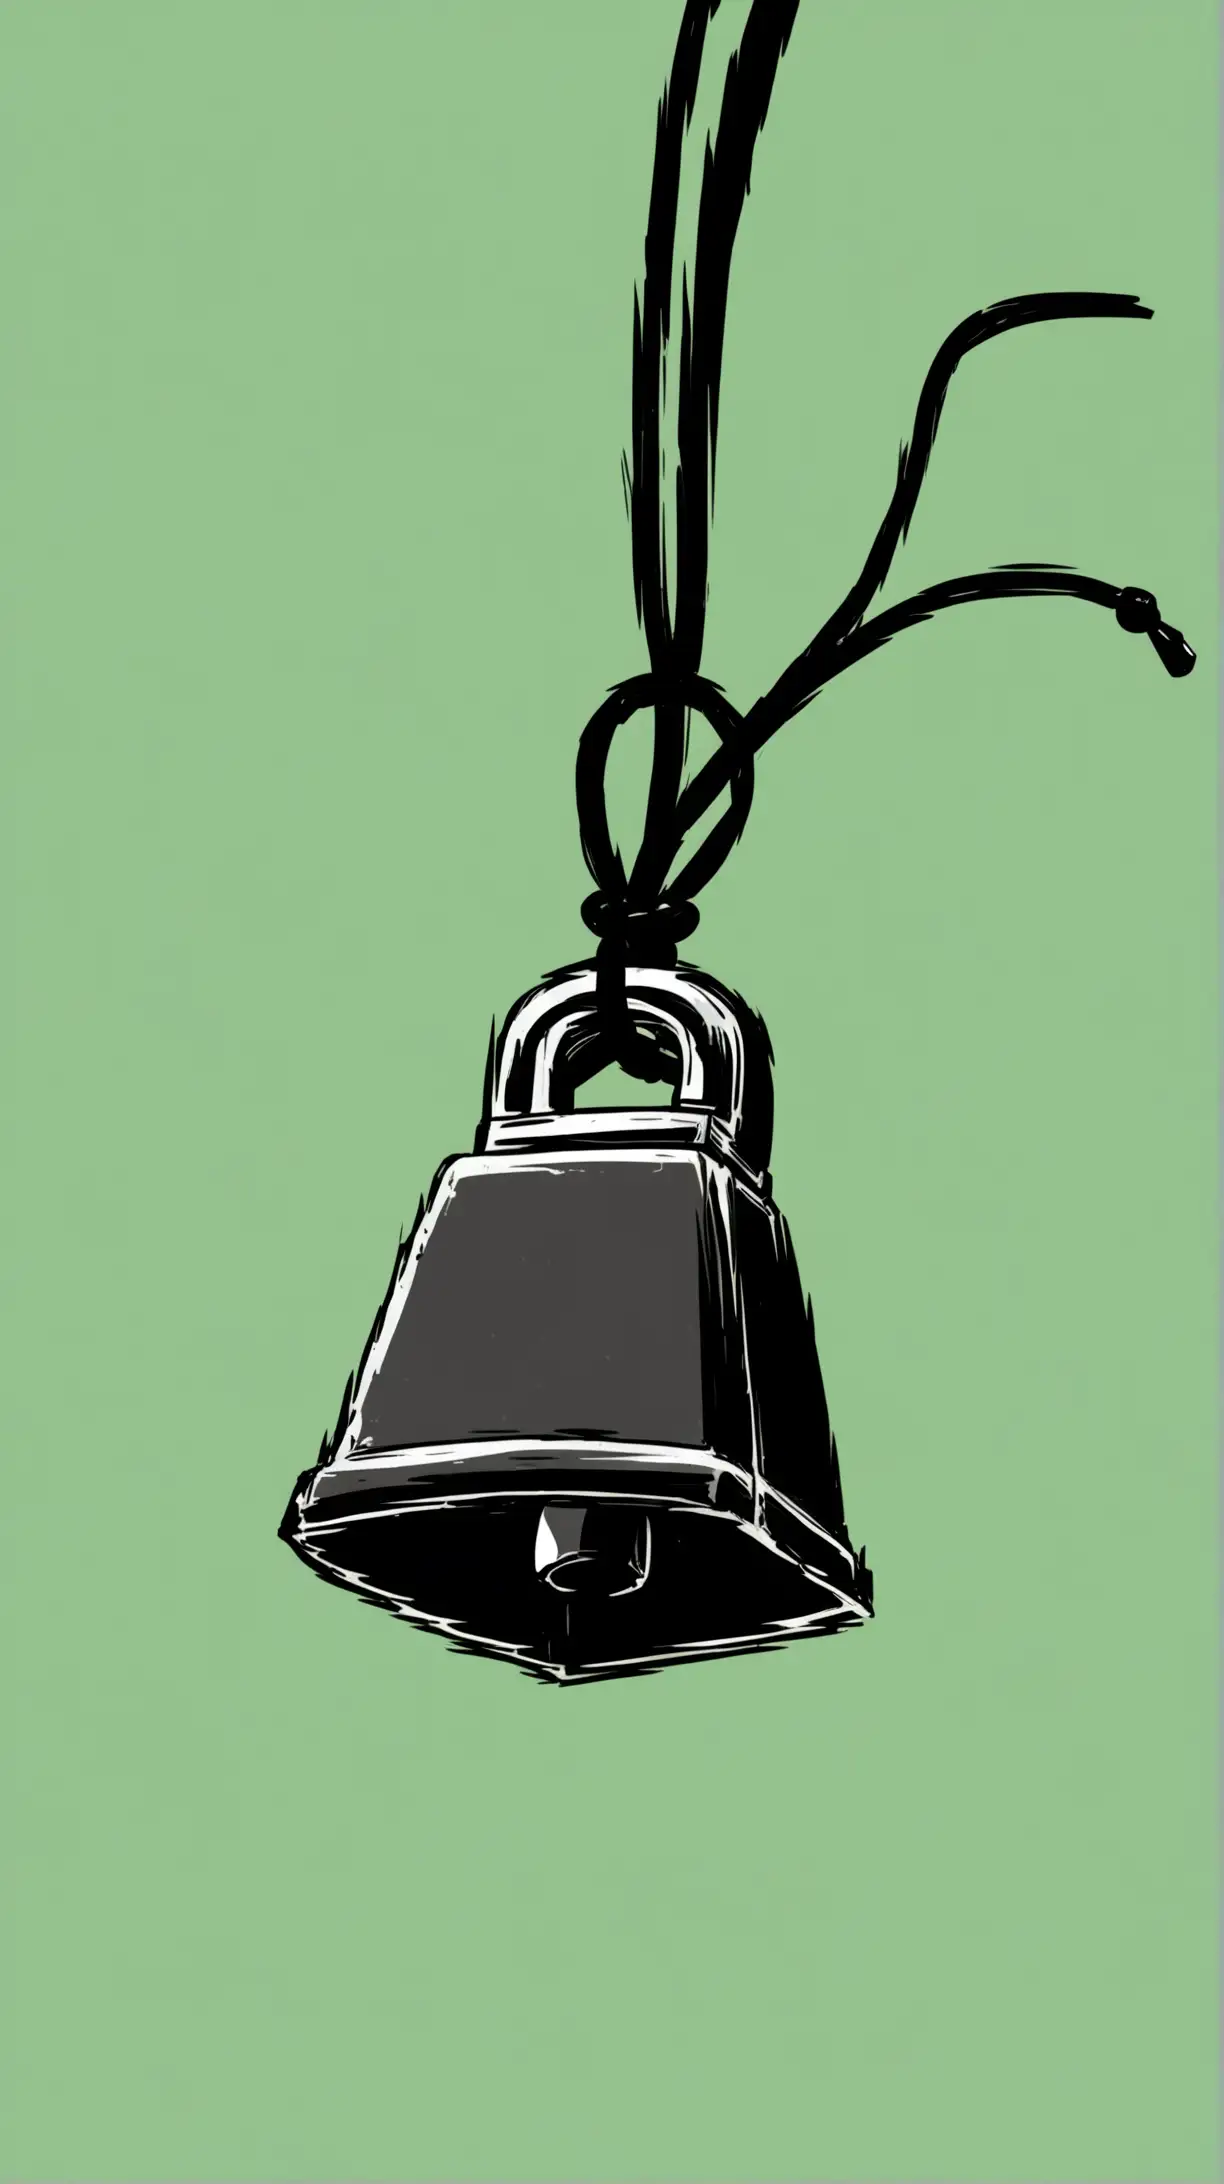 Minimalist Cowbell on Simple Background